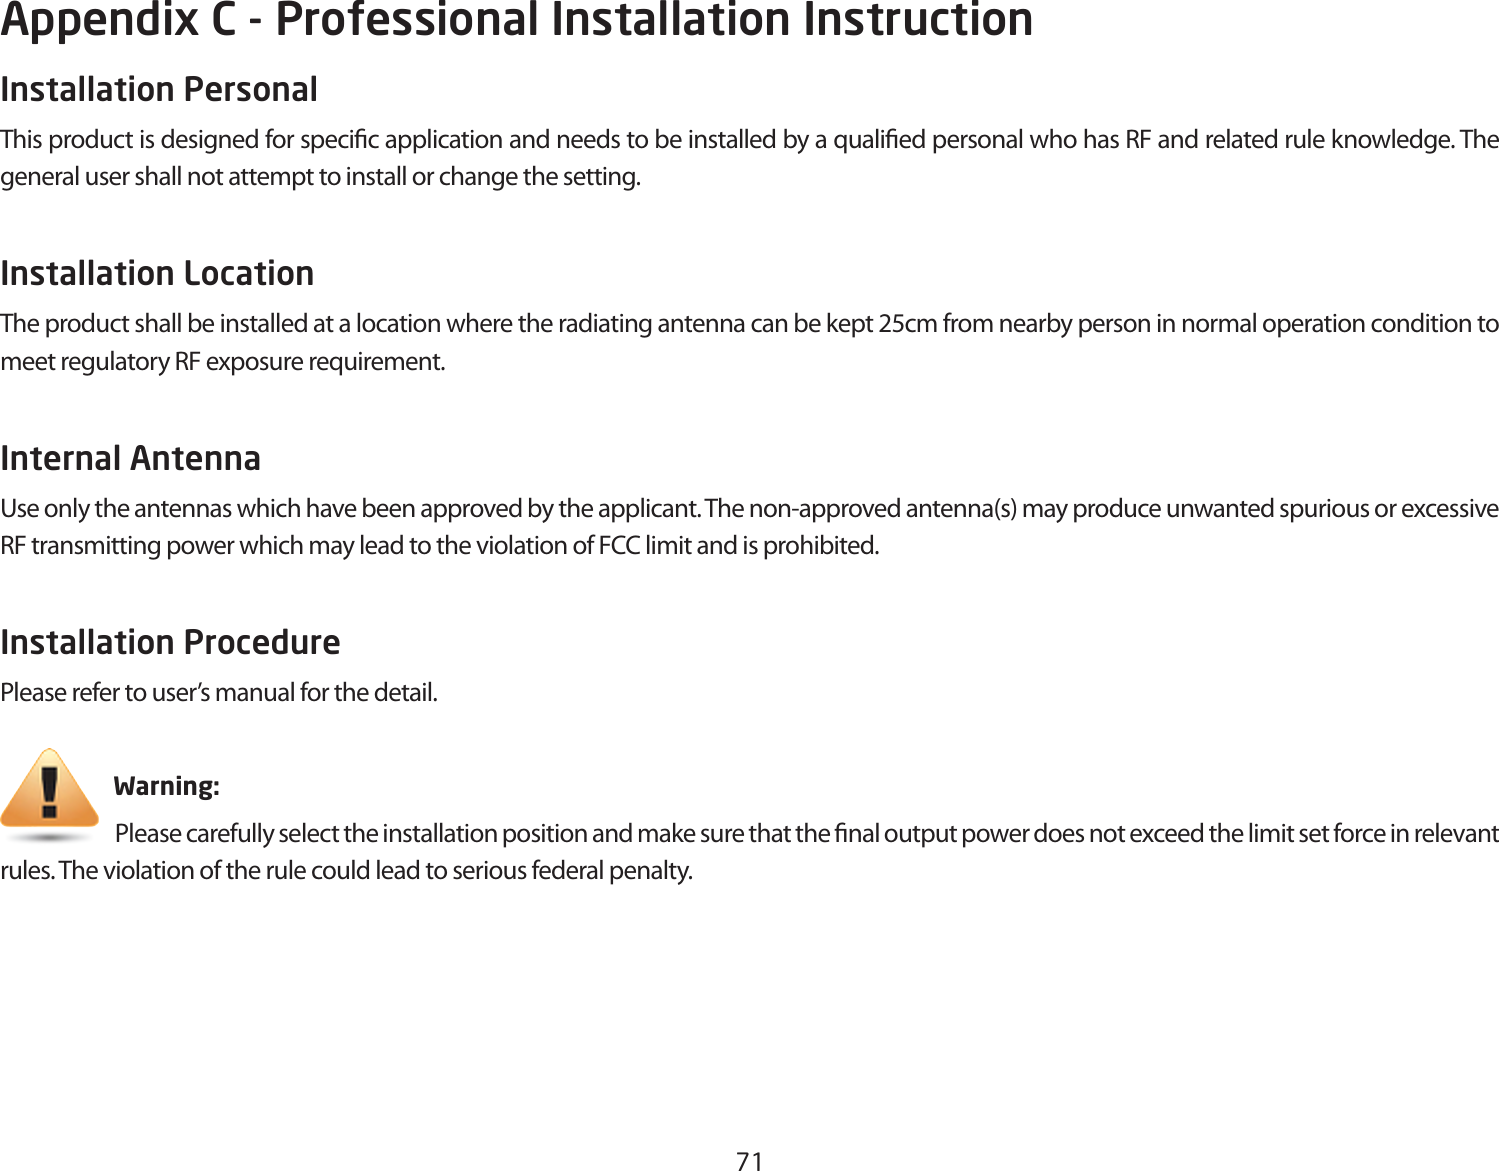 71Appendix C - Professional Installation InstructionInstallation Personal This product is designed for specic application and needs to be installed by a qualied personal who has RF and related rule knowledge. The general user shall not attempt to install or change the setting.Installation Location The product shall be installed at a location where the radiating antenna can be kept 25cm from nearby person in normal operation condition to meet regulatory RF exposure requirement.Internal Antenna Use only the antennas which have been approved by the applicant. The non-approved antenna(s) may produce unwanted spurious or excessive RF transmitting power which may lead to the violation of FCC limit and is prohibited.Installation ProcedurePlease refer to user’s manual for the detail.                       Warning:                             Please carefully select the installation position and make sure that the nal output power does not exceed the limit set force in relevant rules. The violation of the rule could lead to serious federal penalty.